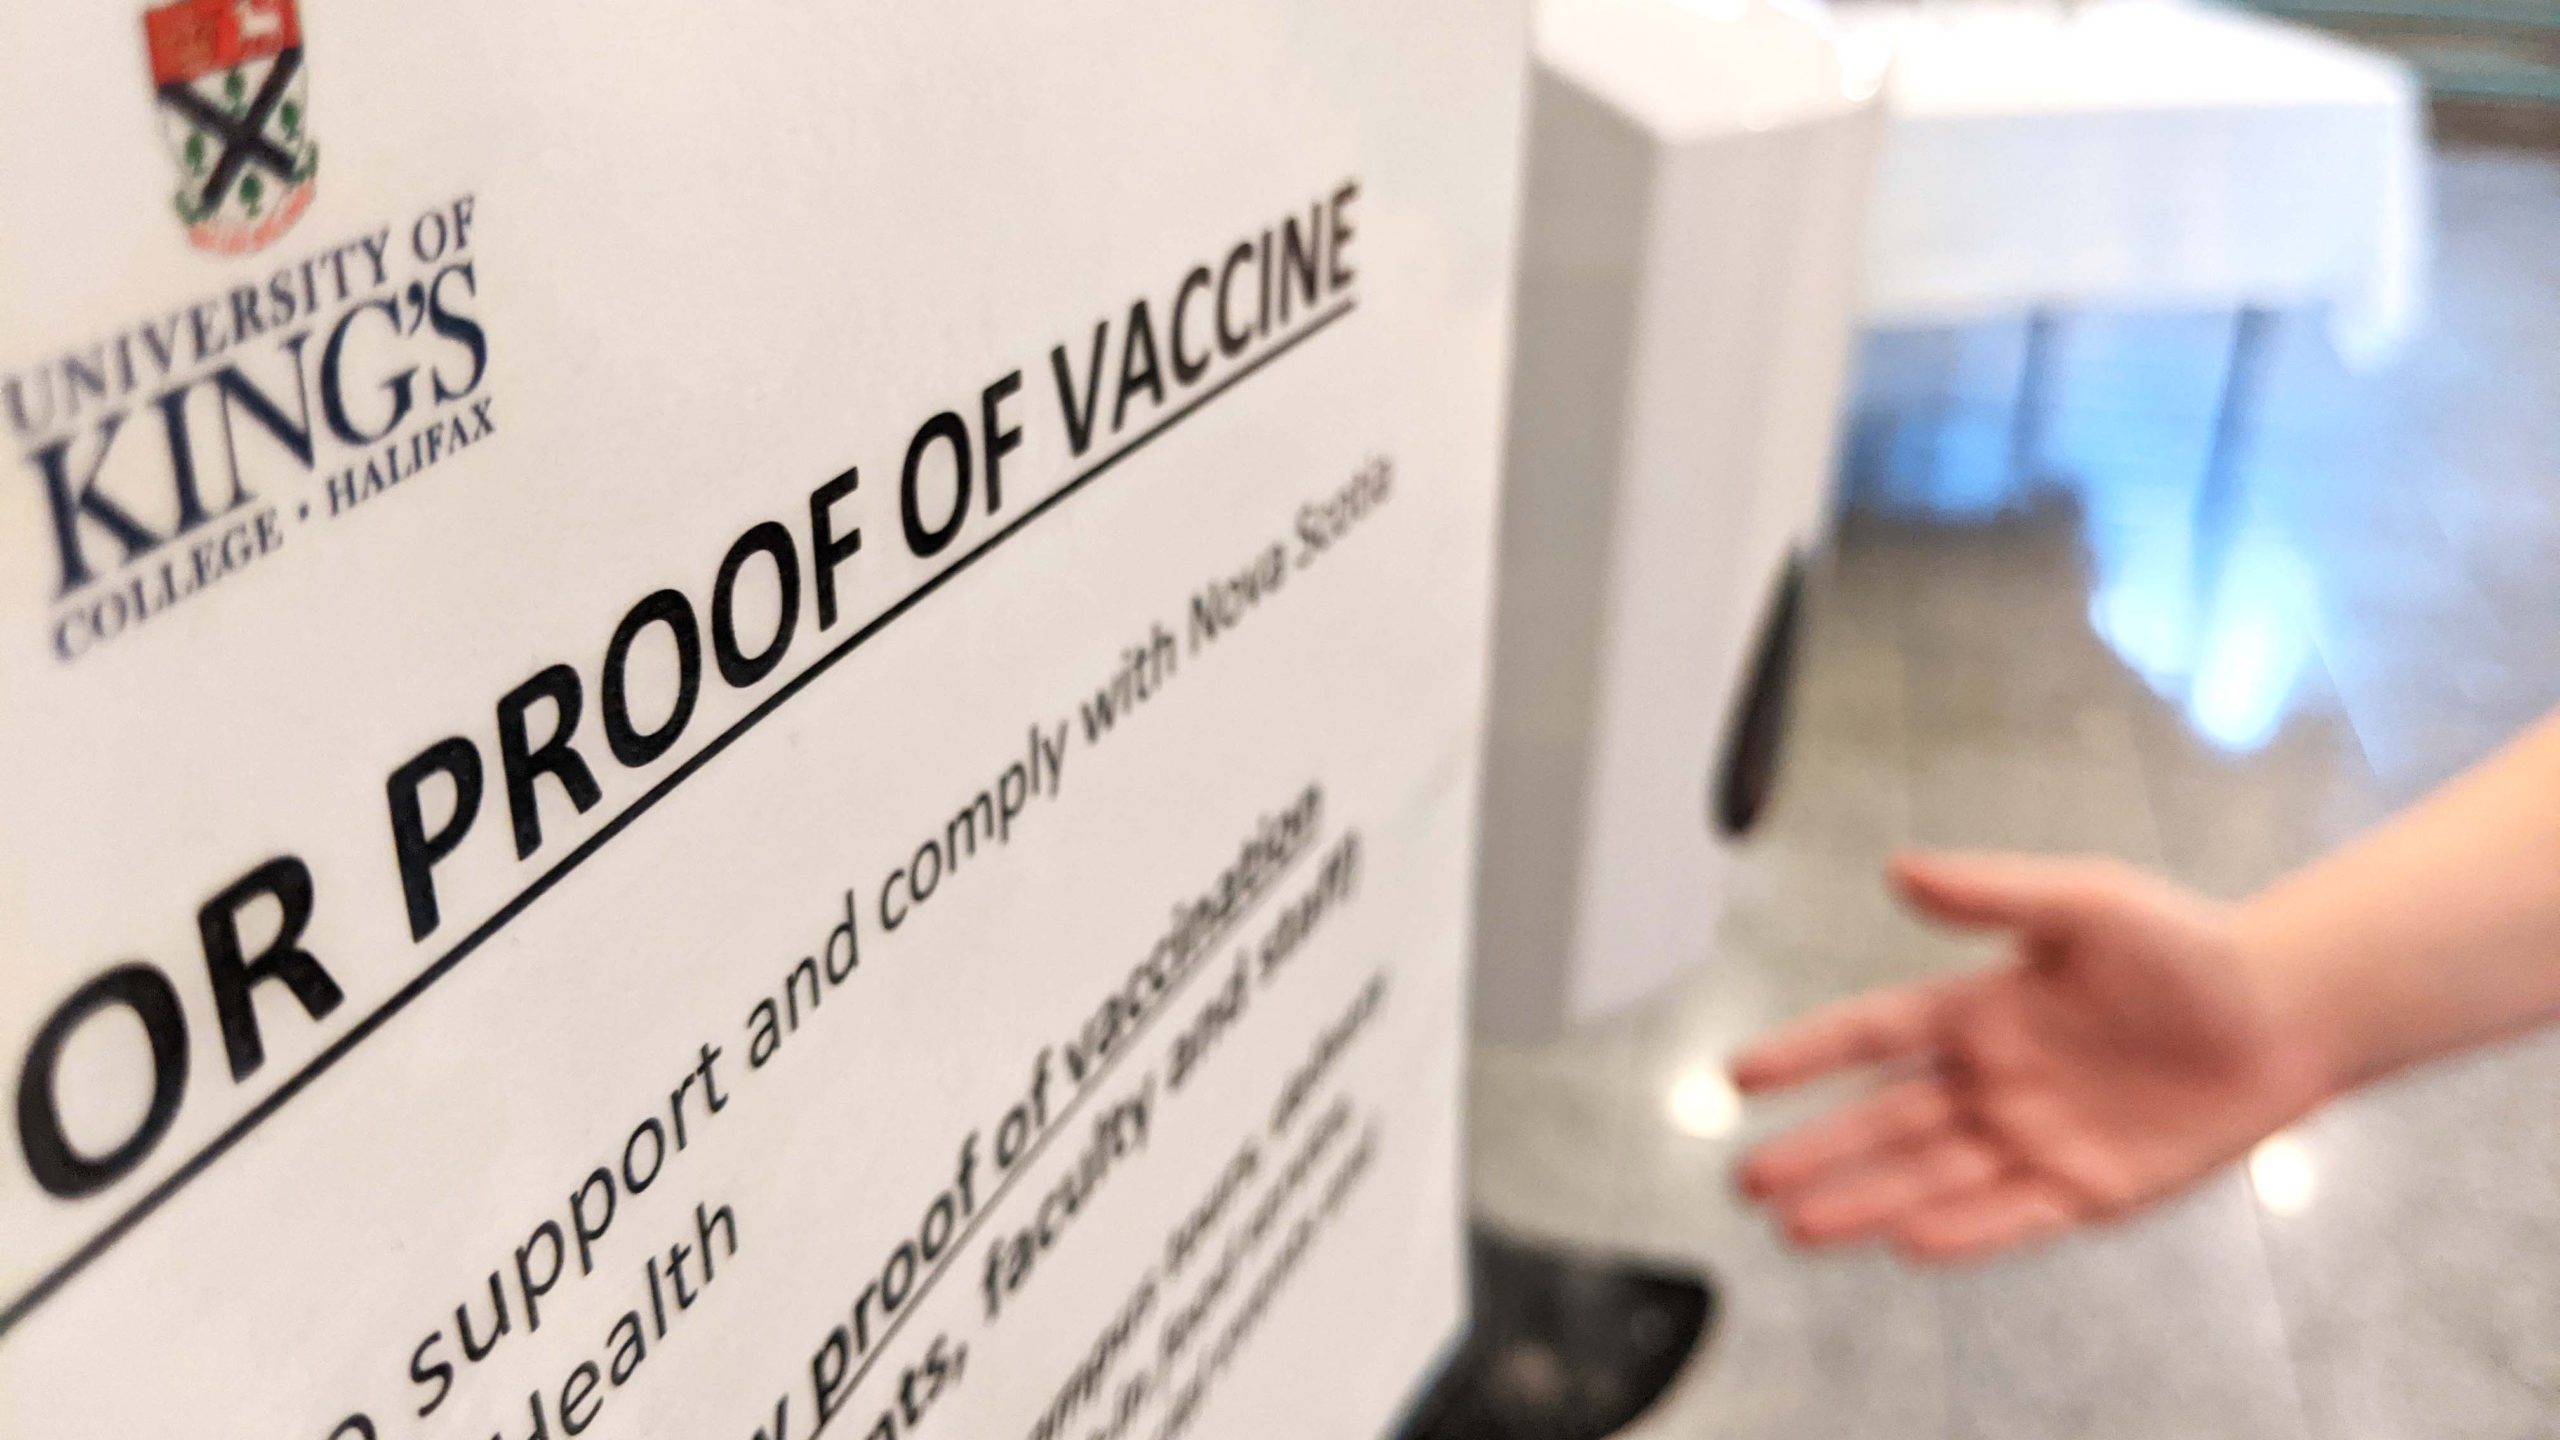 Proof of vaccination is required at the University of King's College.